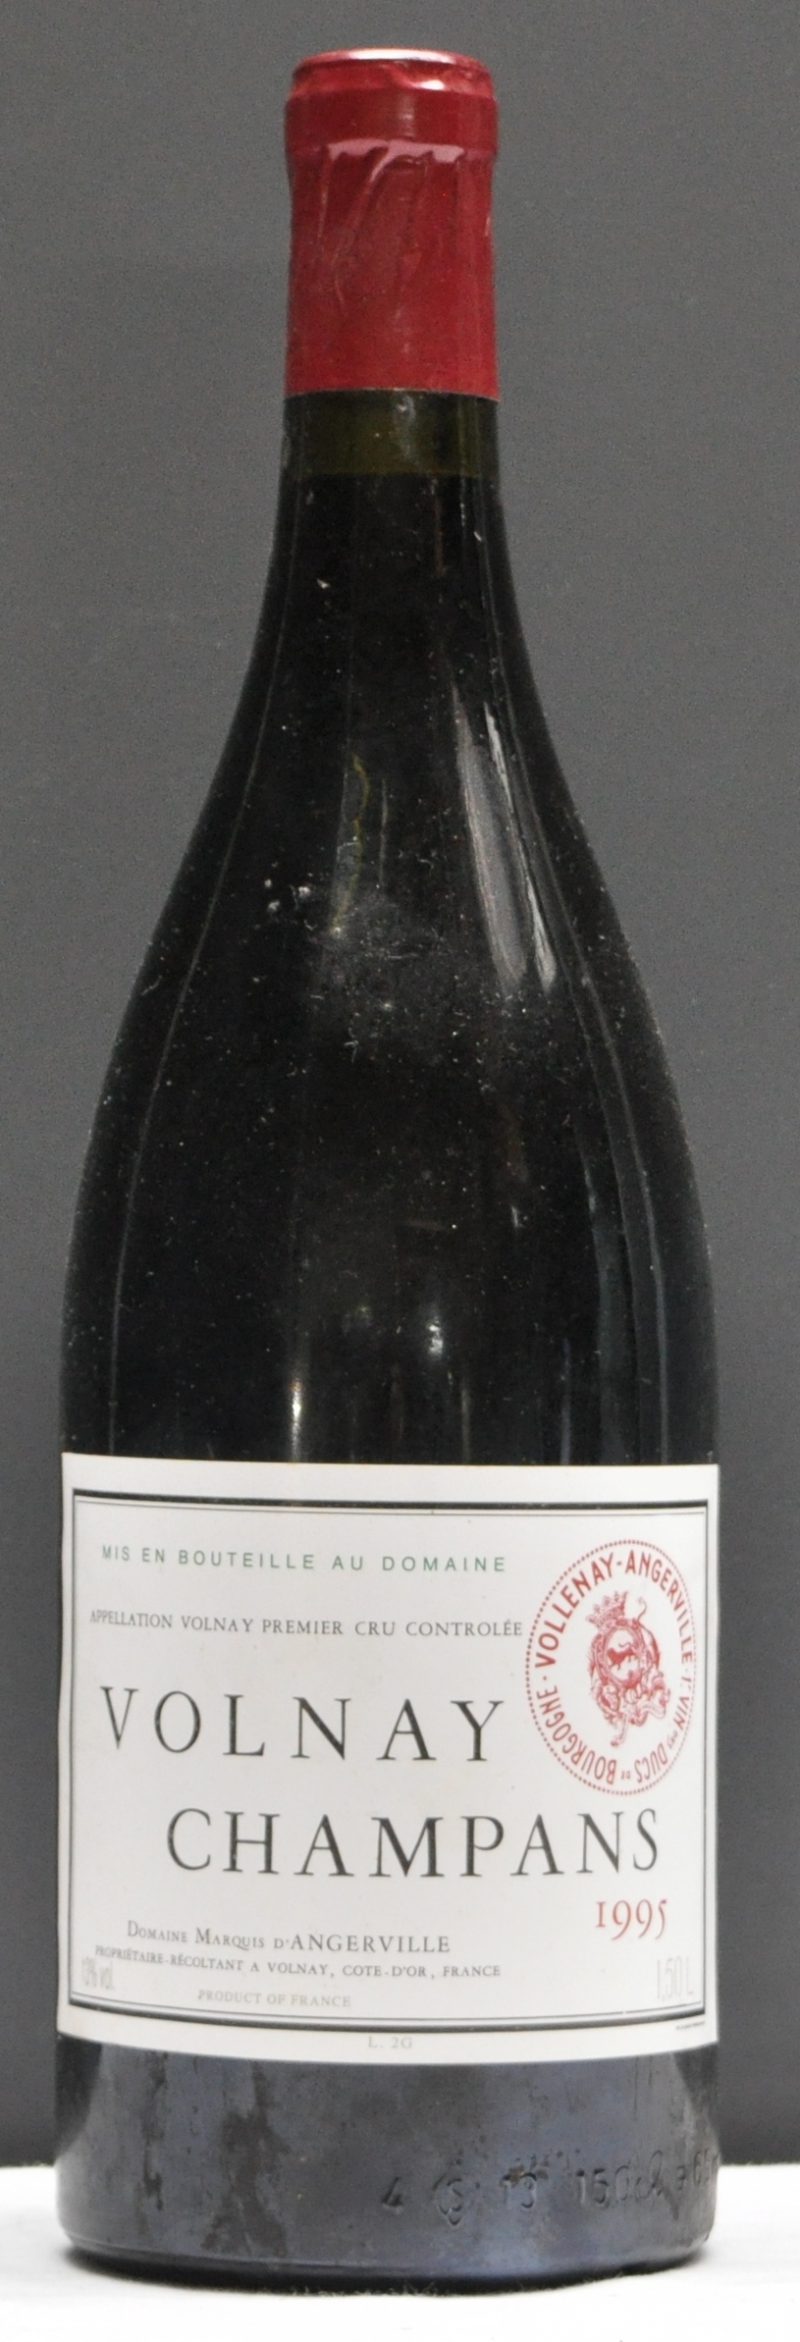 Volnay 1e Cru Champans A.C.  Dom. Marquis d’Angerville, Volnay M.D.  1995  aantal: 1 Mag.